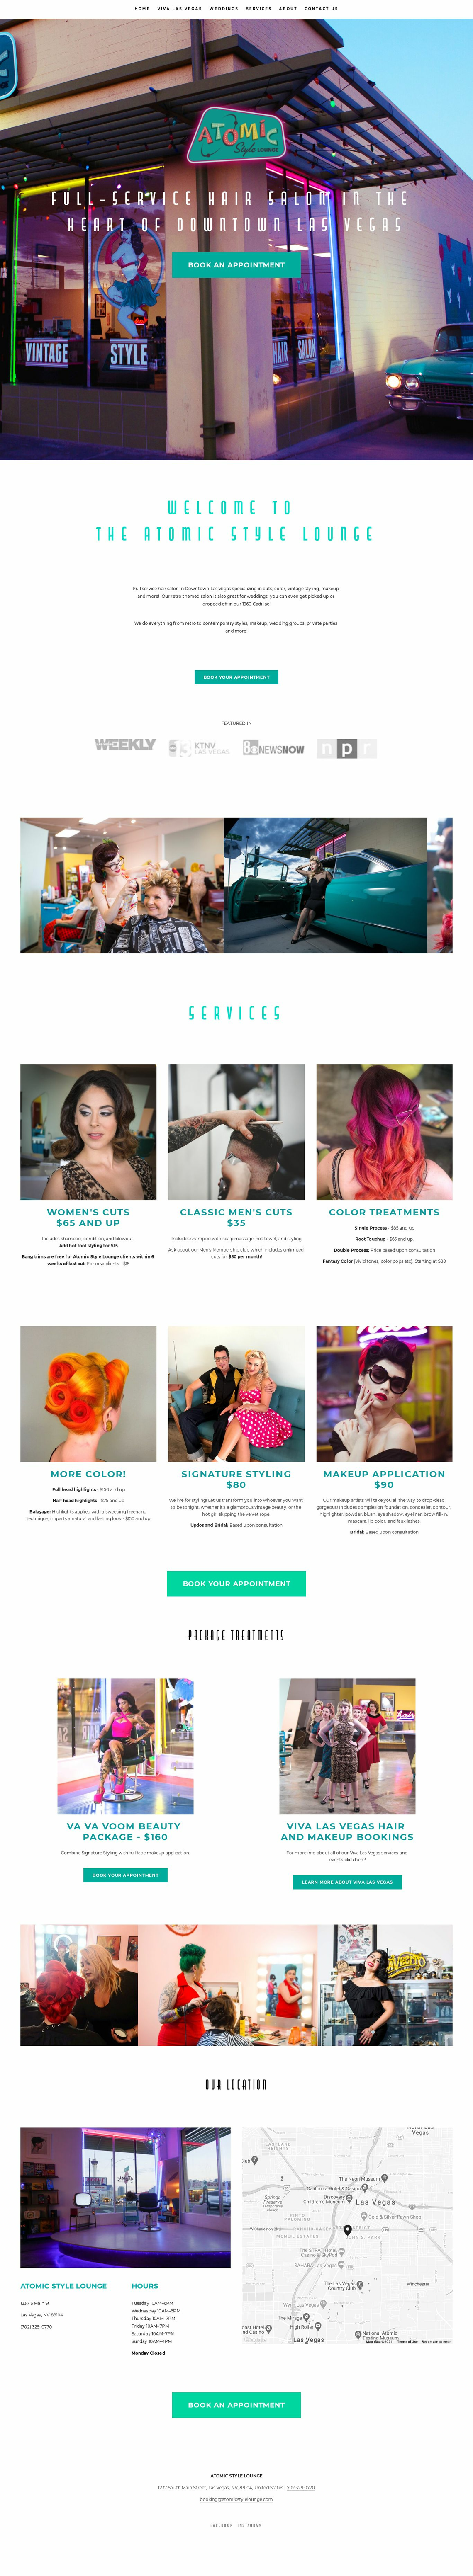 Landing Page Template for Hair Salon - atomicstylelounge.com